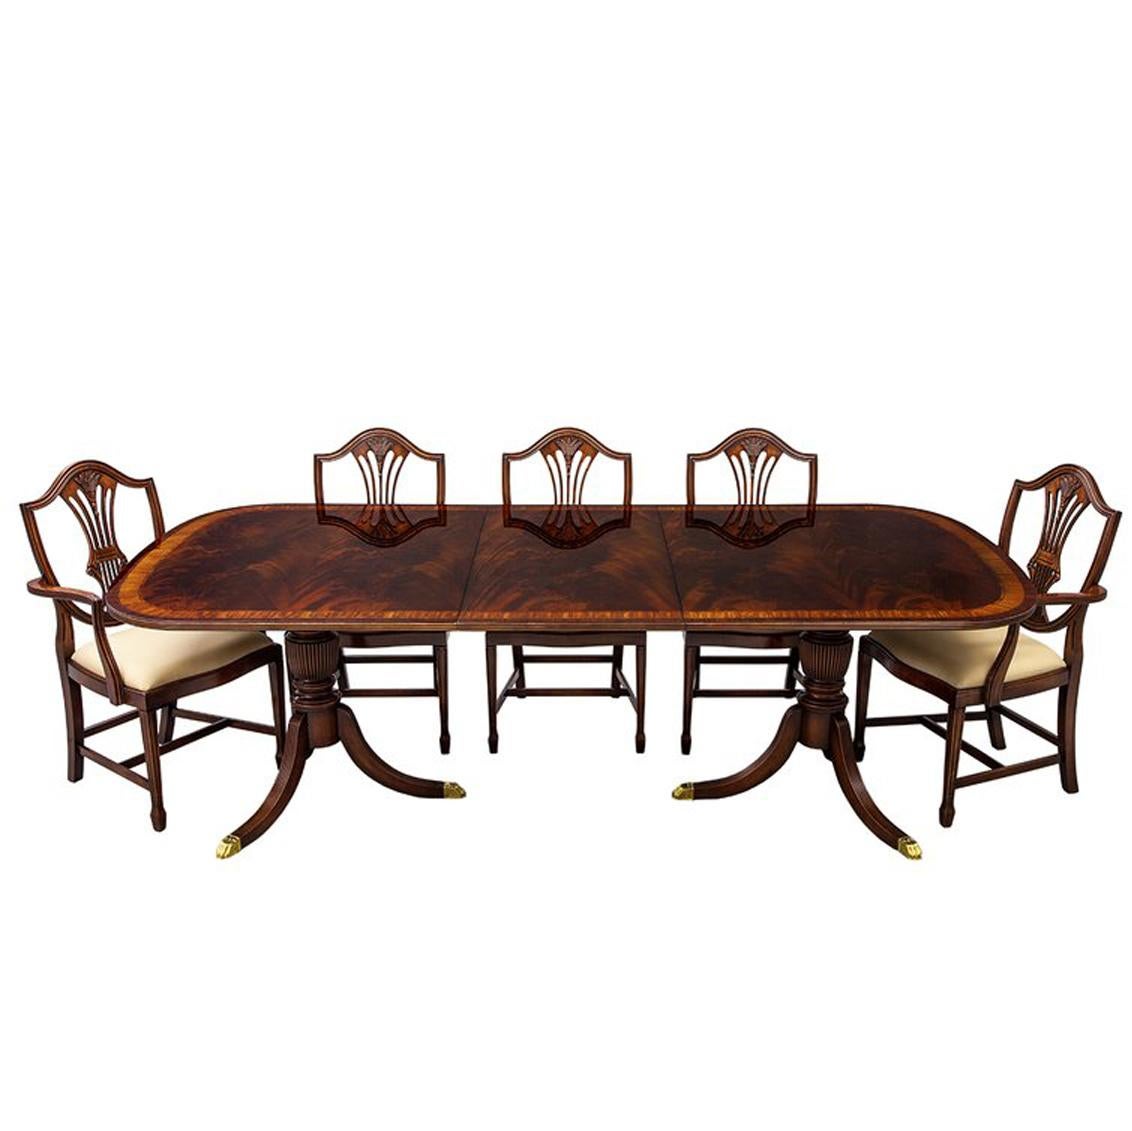 Flamed Mahogany Duncan Phyfe Style High Gloss Dining Table And 8 Chairs Set At 1stdibs